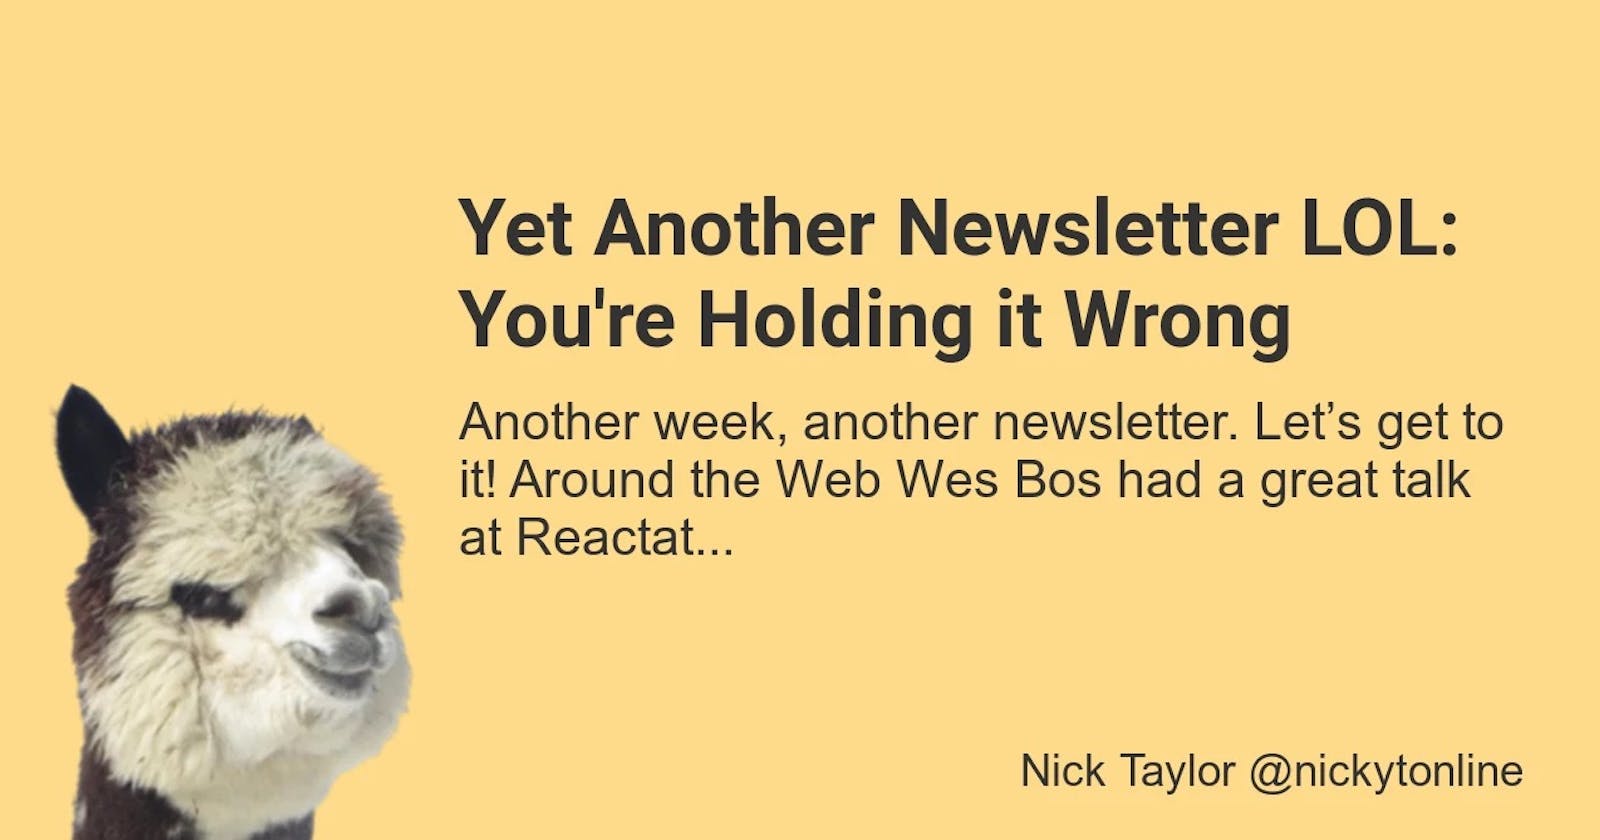 Yet Another Newsletter LOL: You're Holding it Wrong